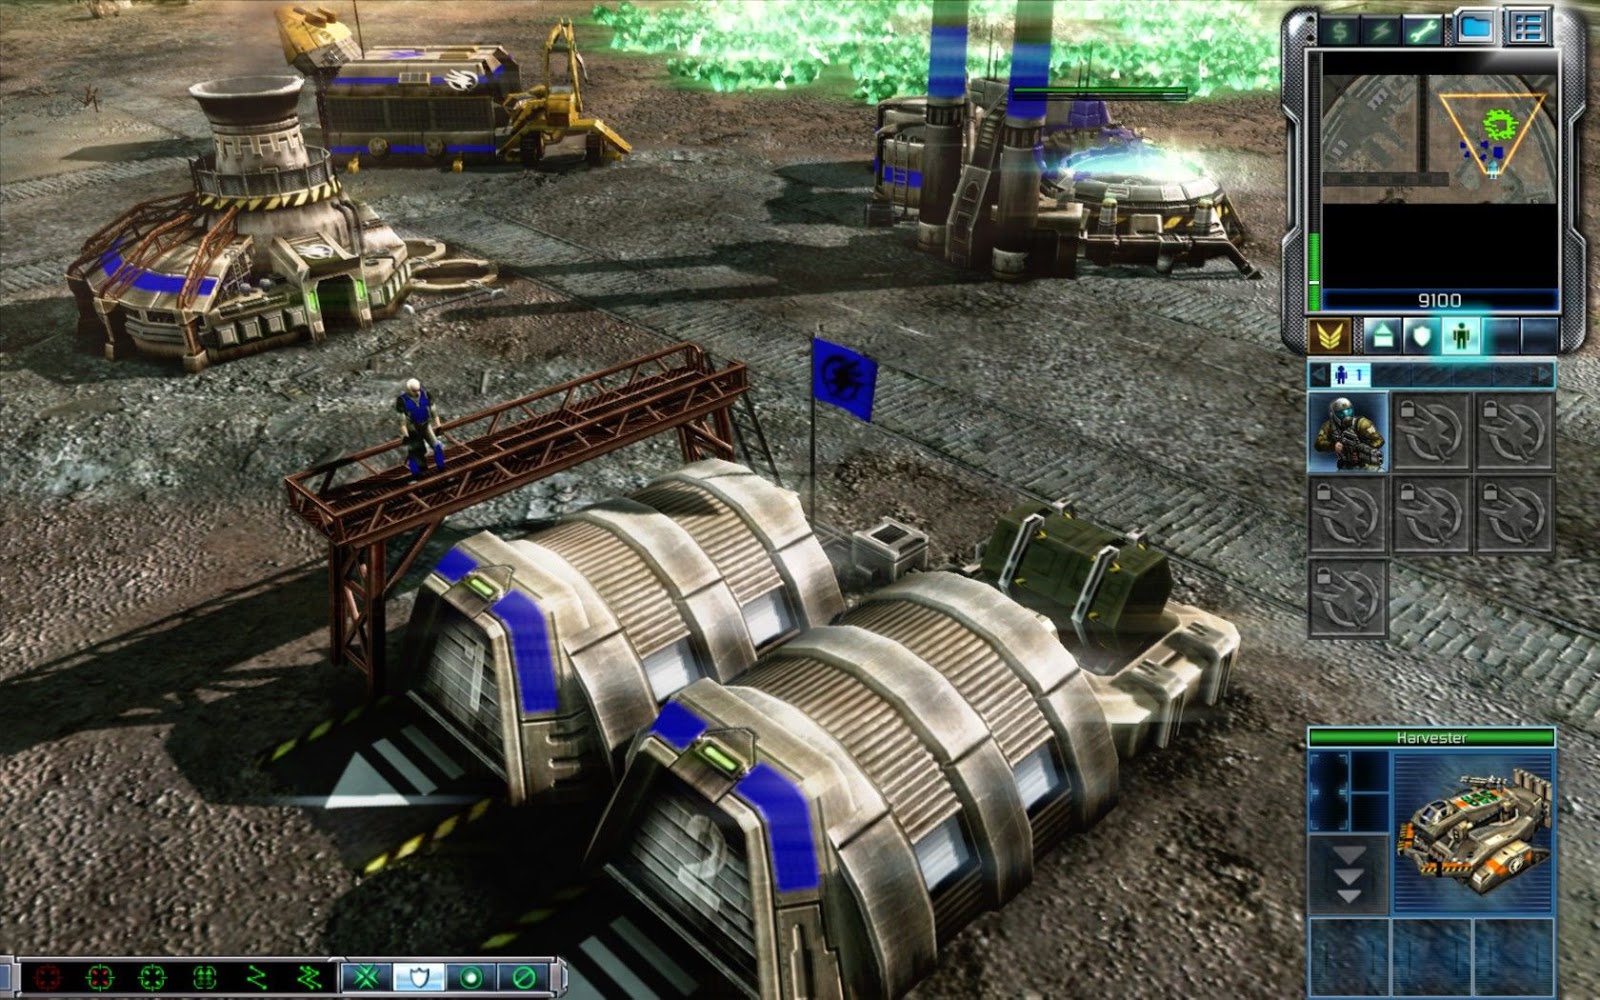 Command & Conquer 3: Tiberium Wars Complete Collection MULTi10 for PC 14.6 GB Full Repack ...